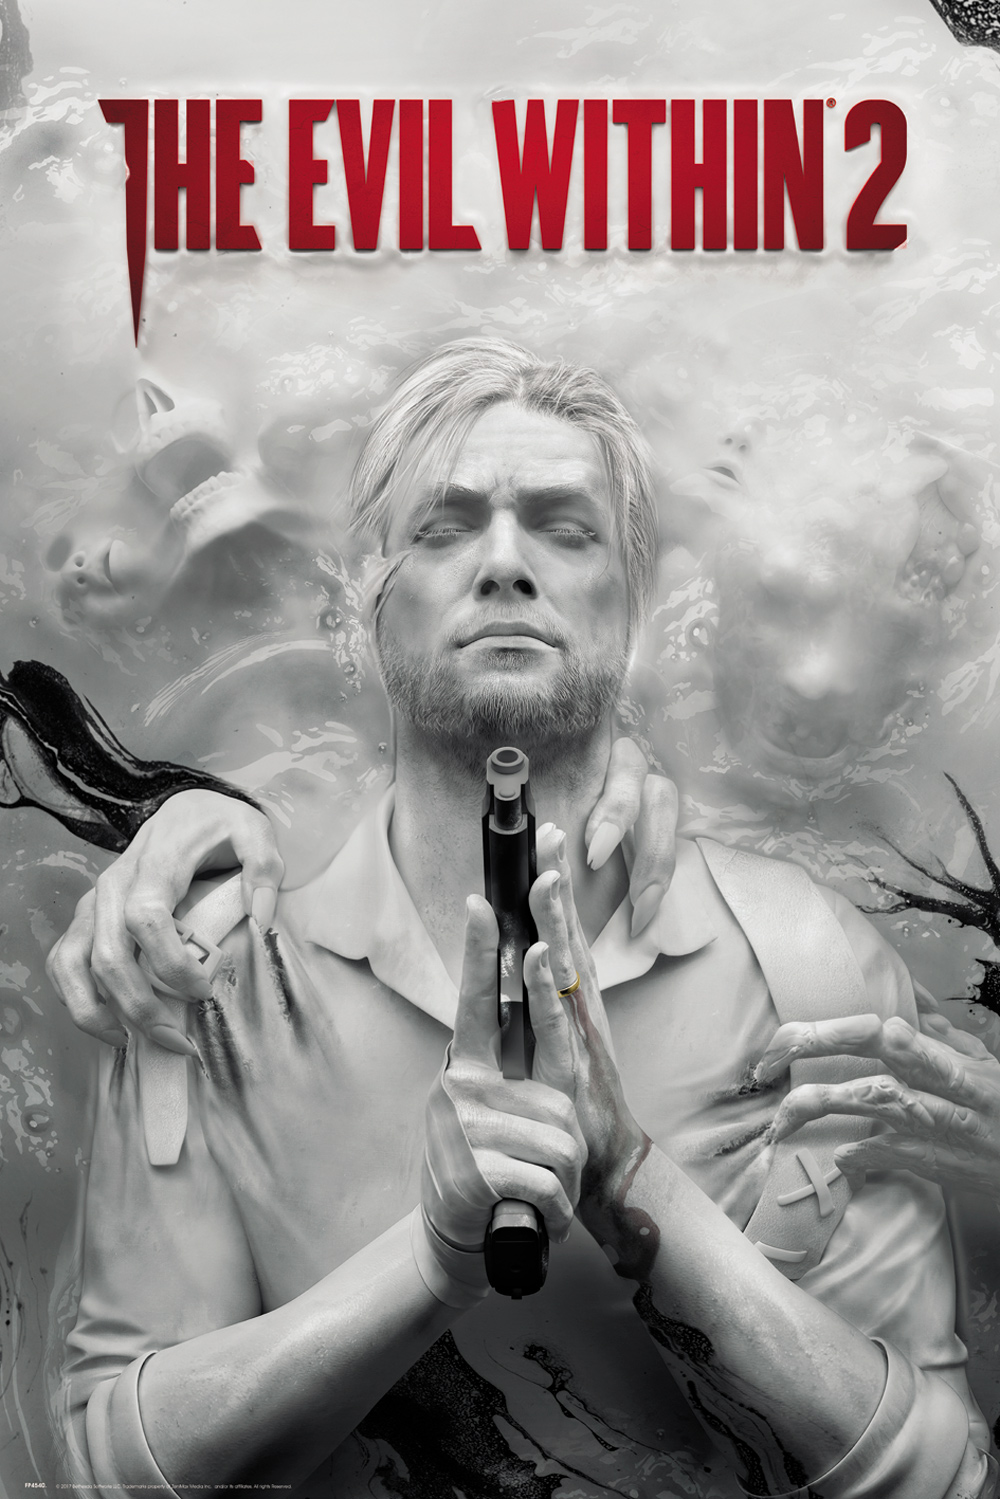 kaufe-the-evil-within-2-amazing-maxi-poster-61x91-5cm